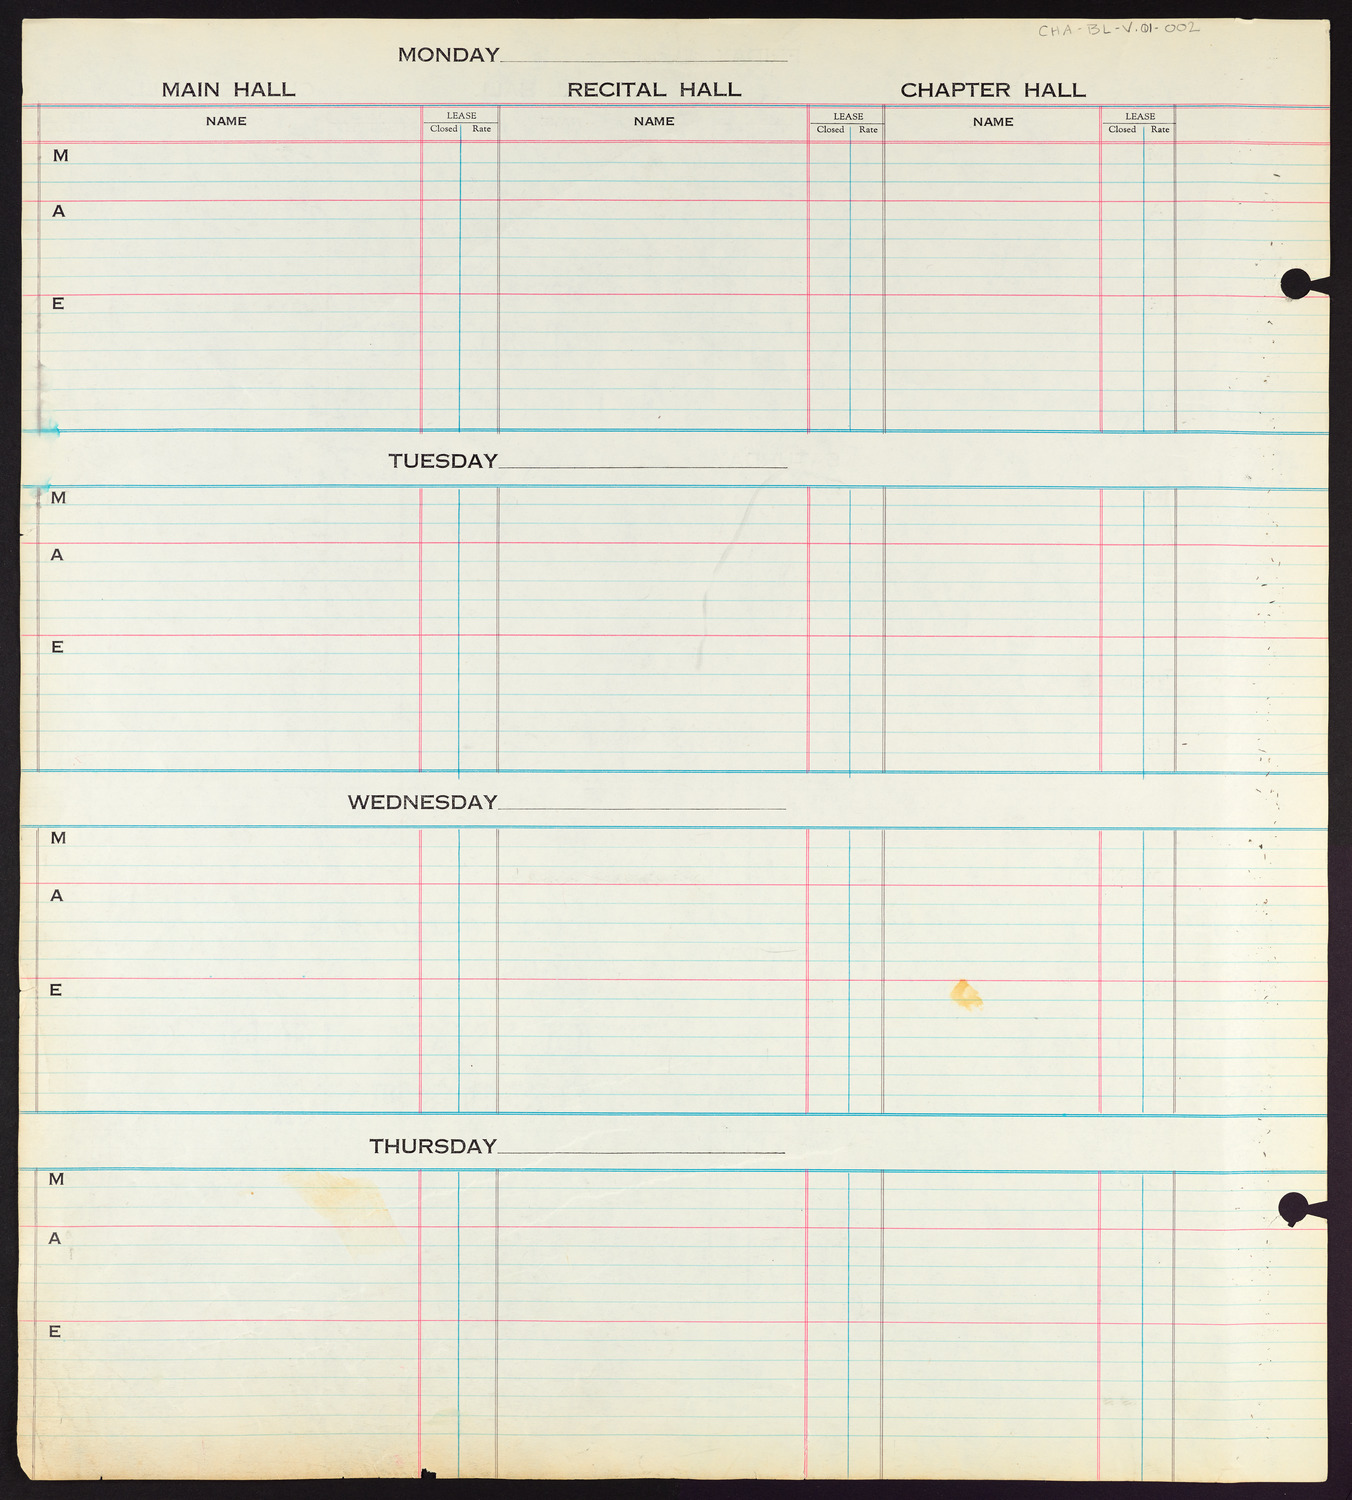 Carnegie Hall Booking Ledger, volume 1, page 2